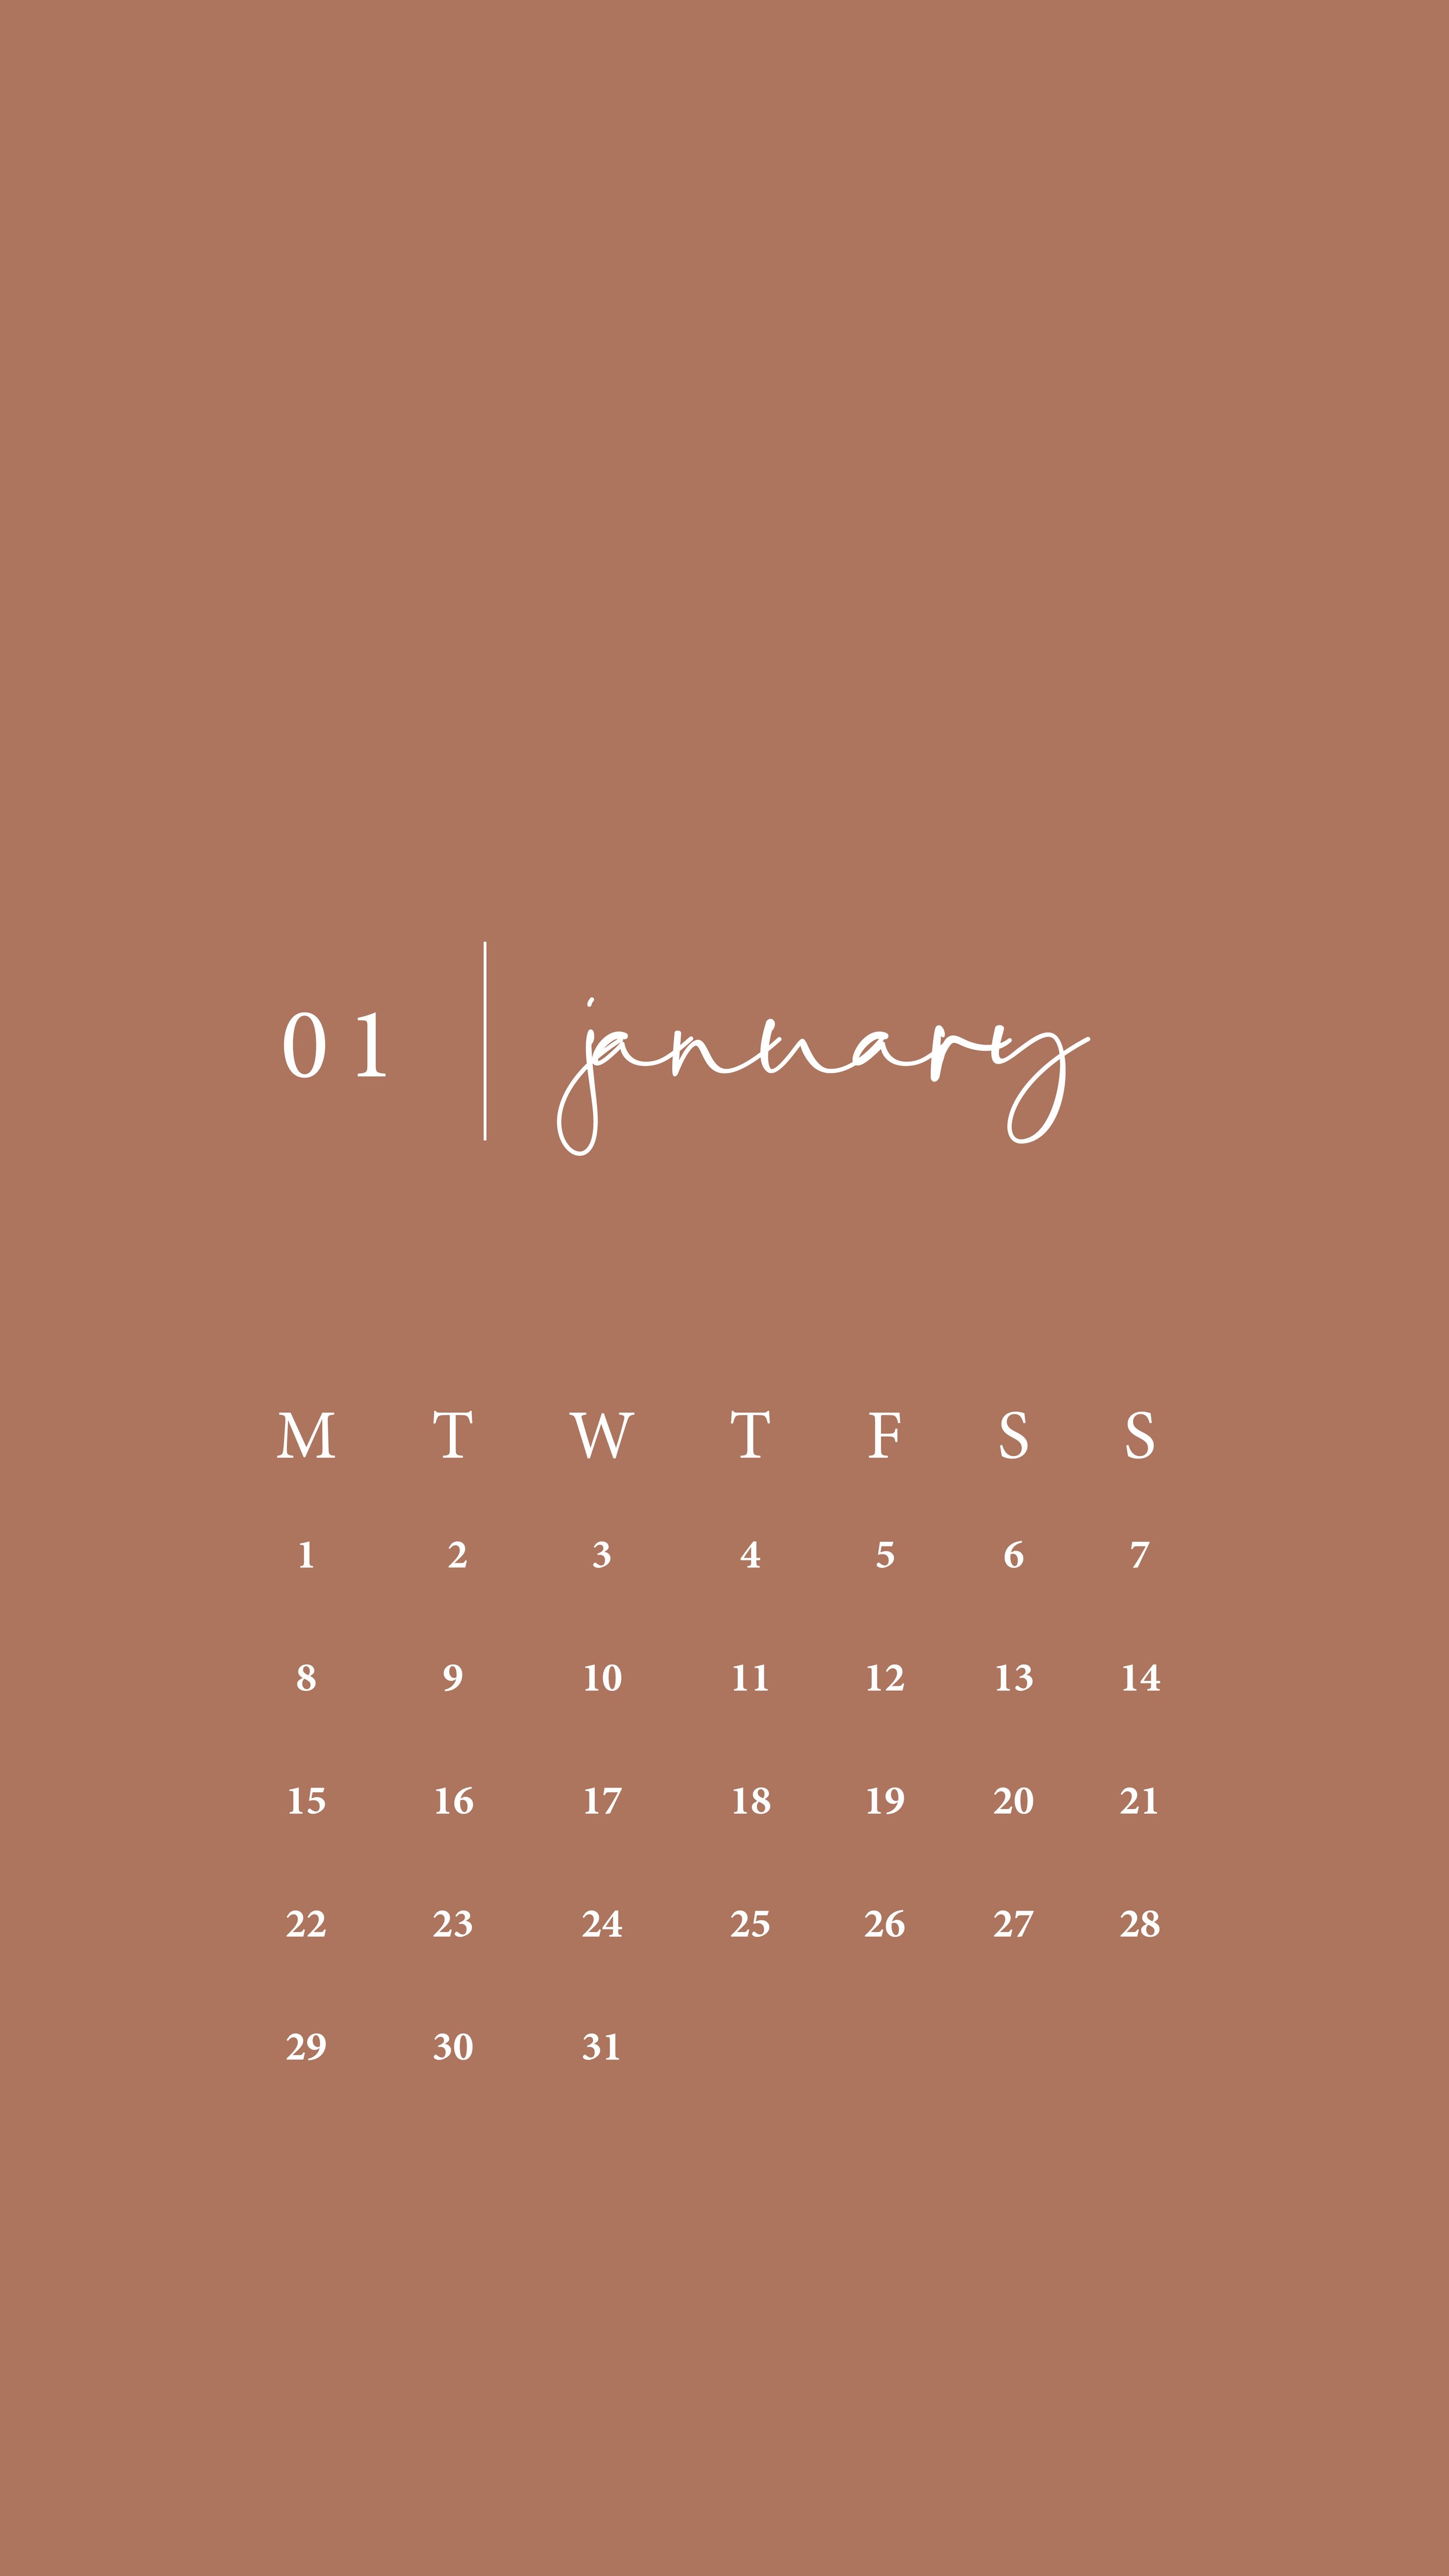 Calendars, Greeting Cards, Wallpapers